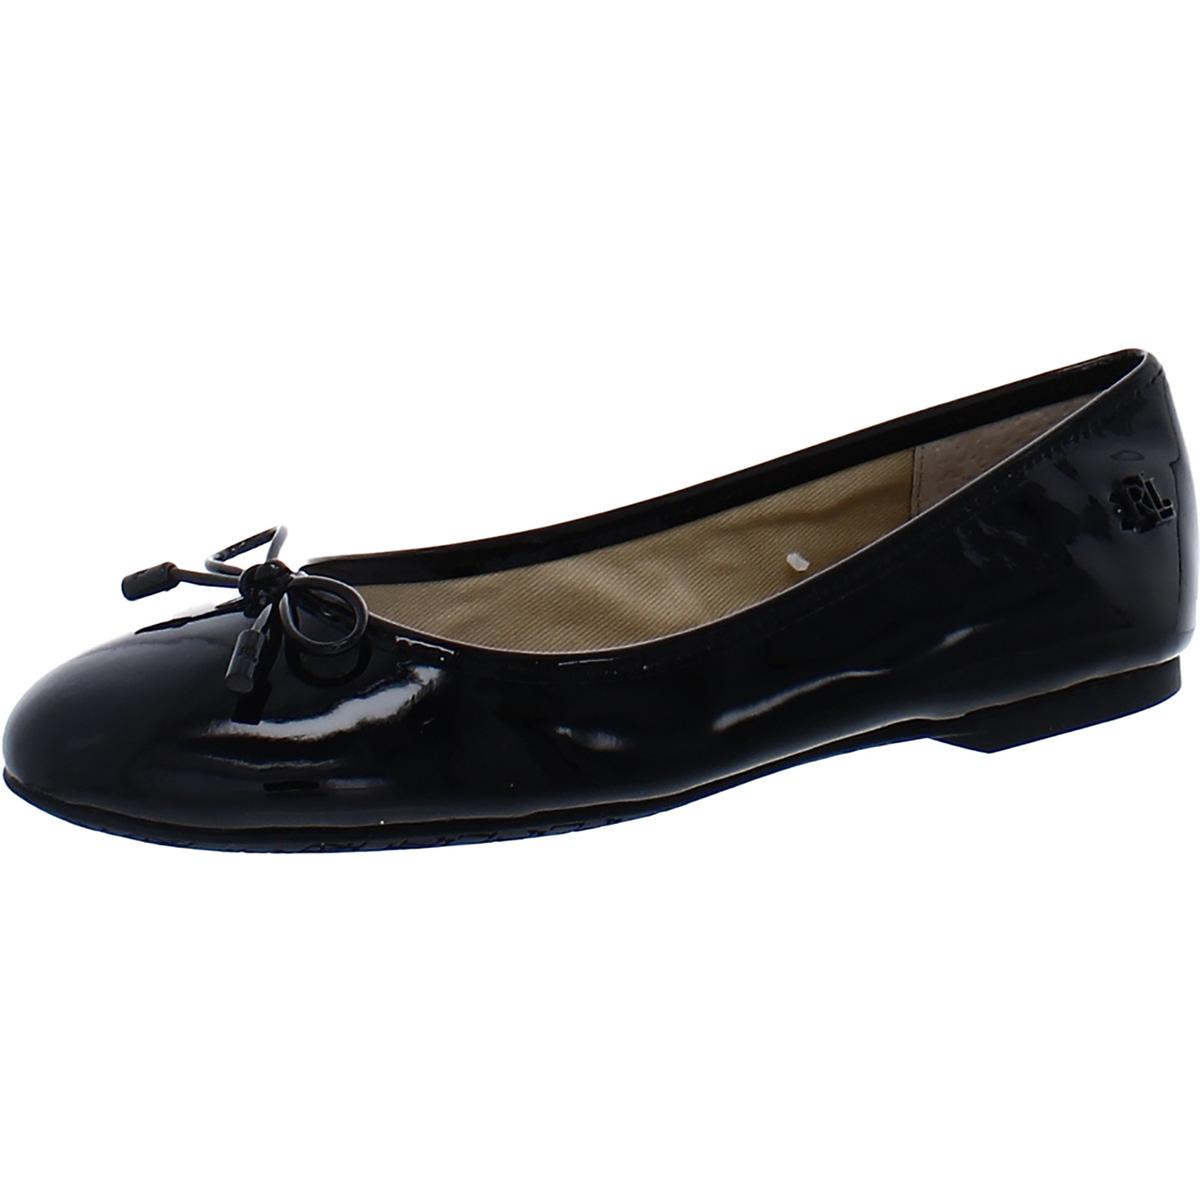 Selected Color is Black Patent Leather